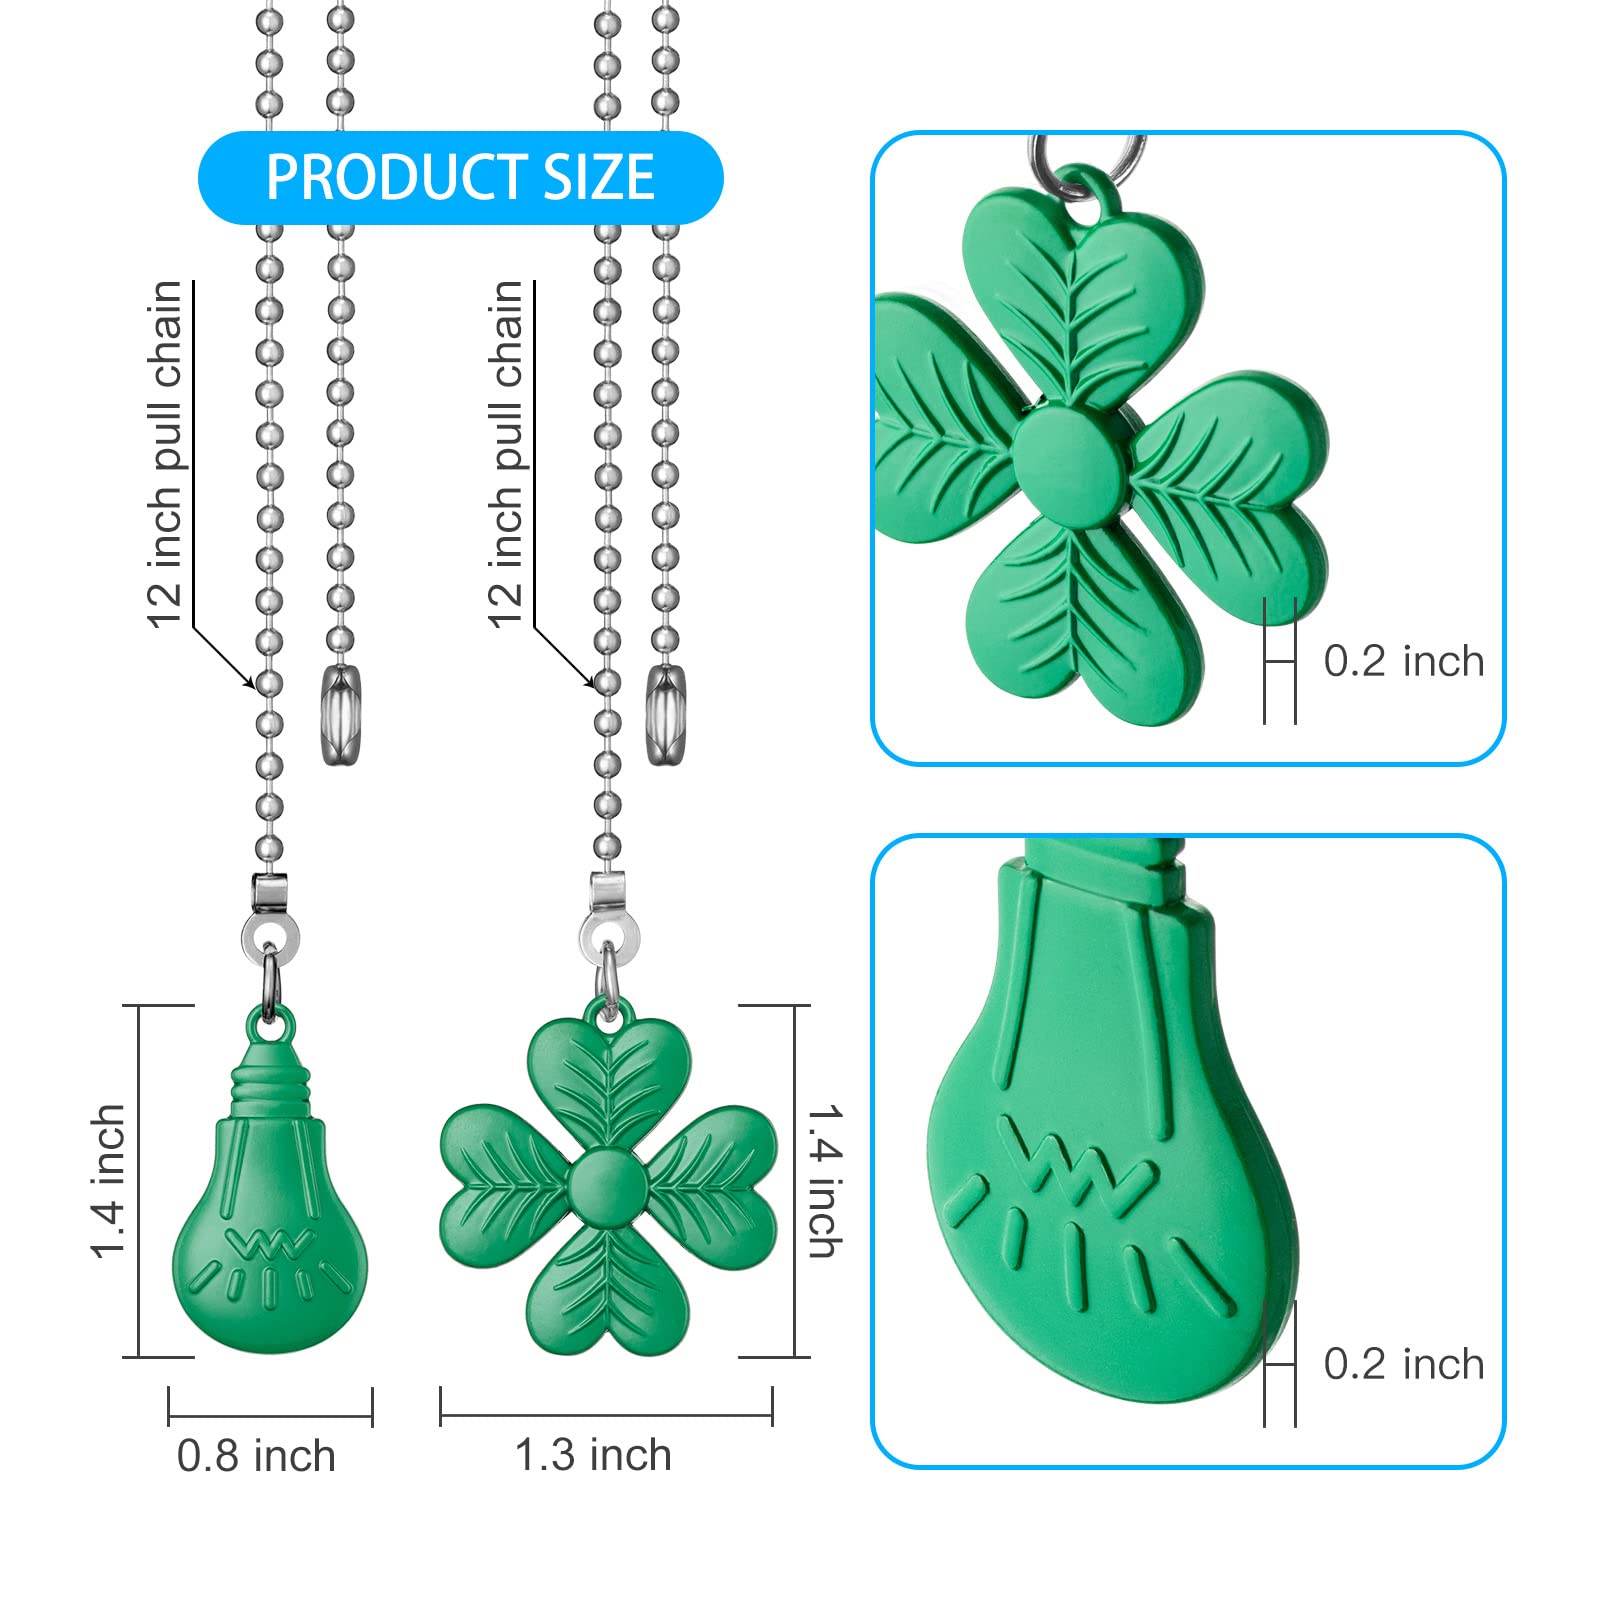 2 Pieces Ceiling Fan Pull Chain Set, Light Bulb and Fan Pattern Pull Chain Extension 12 Inch 3mm Diameter Beaded Ball Connector Best for use with Ceiling Fan Lighting (Green)